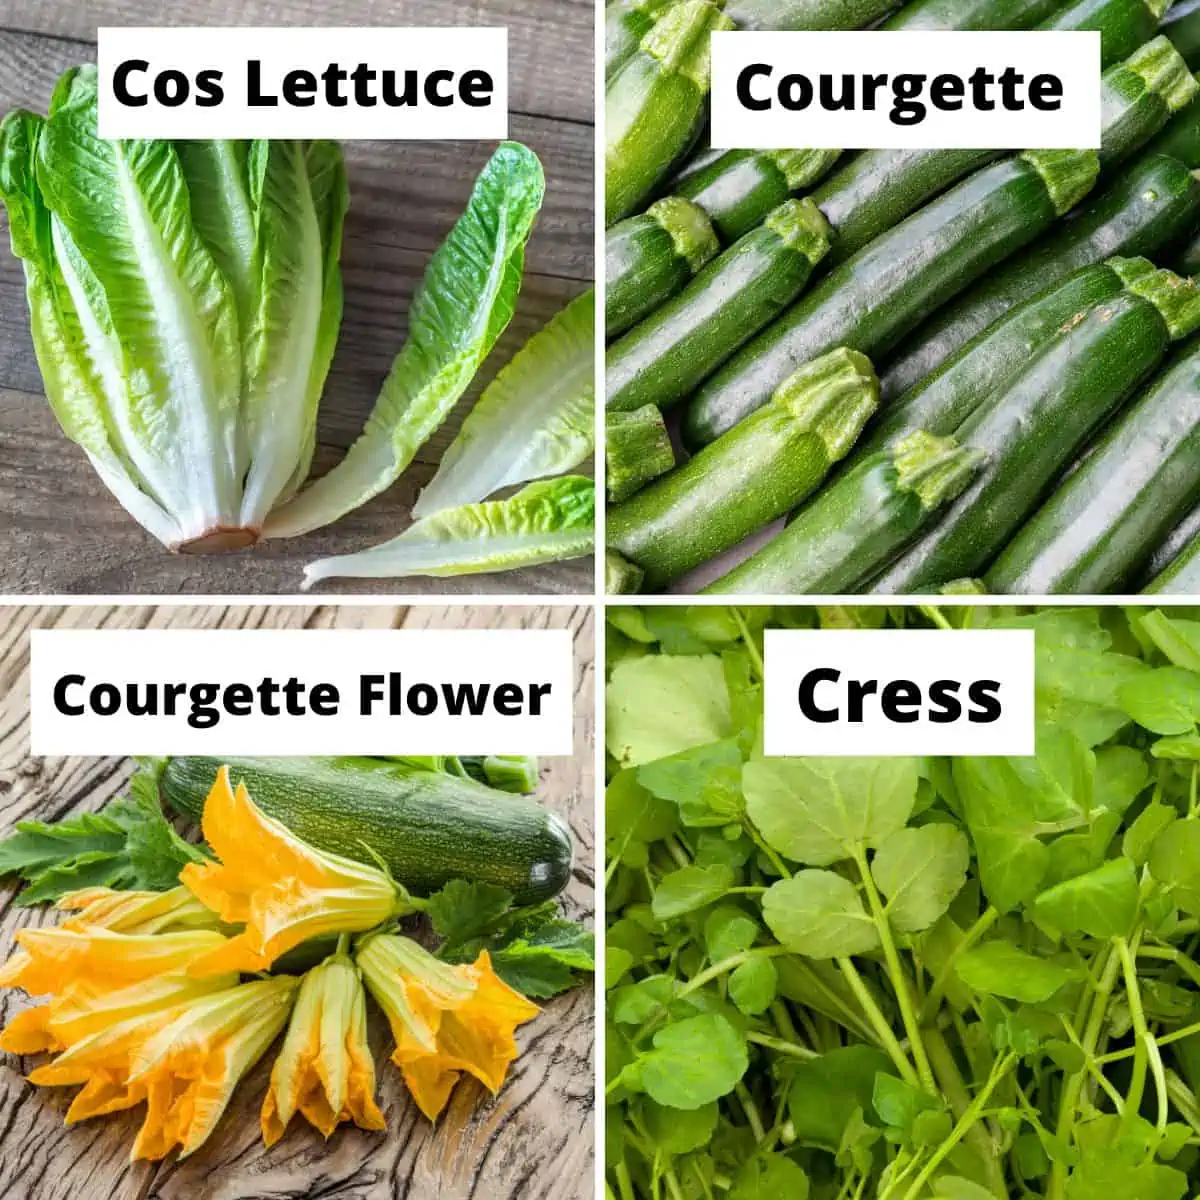 Vegetables that Start with C: Cos lettuce, courgette, courgette flowers, cress.
